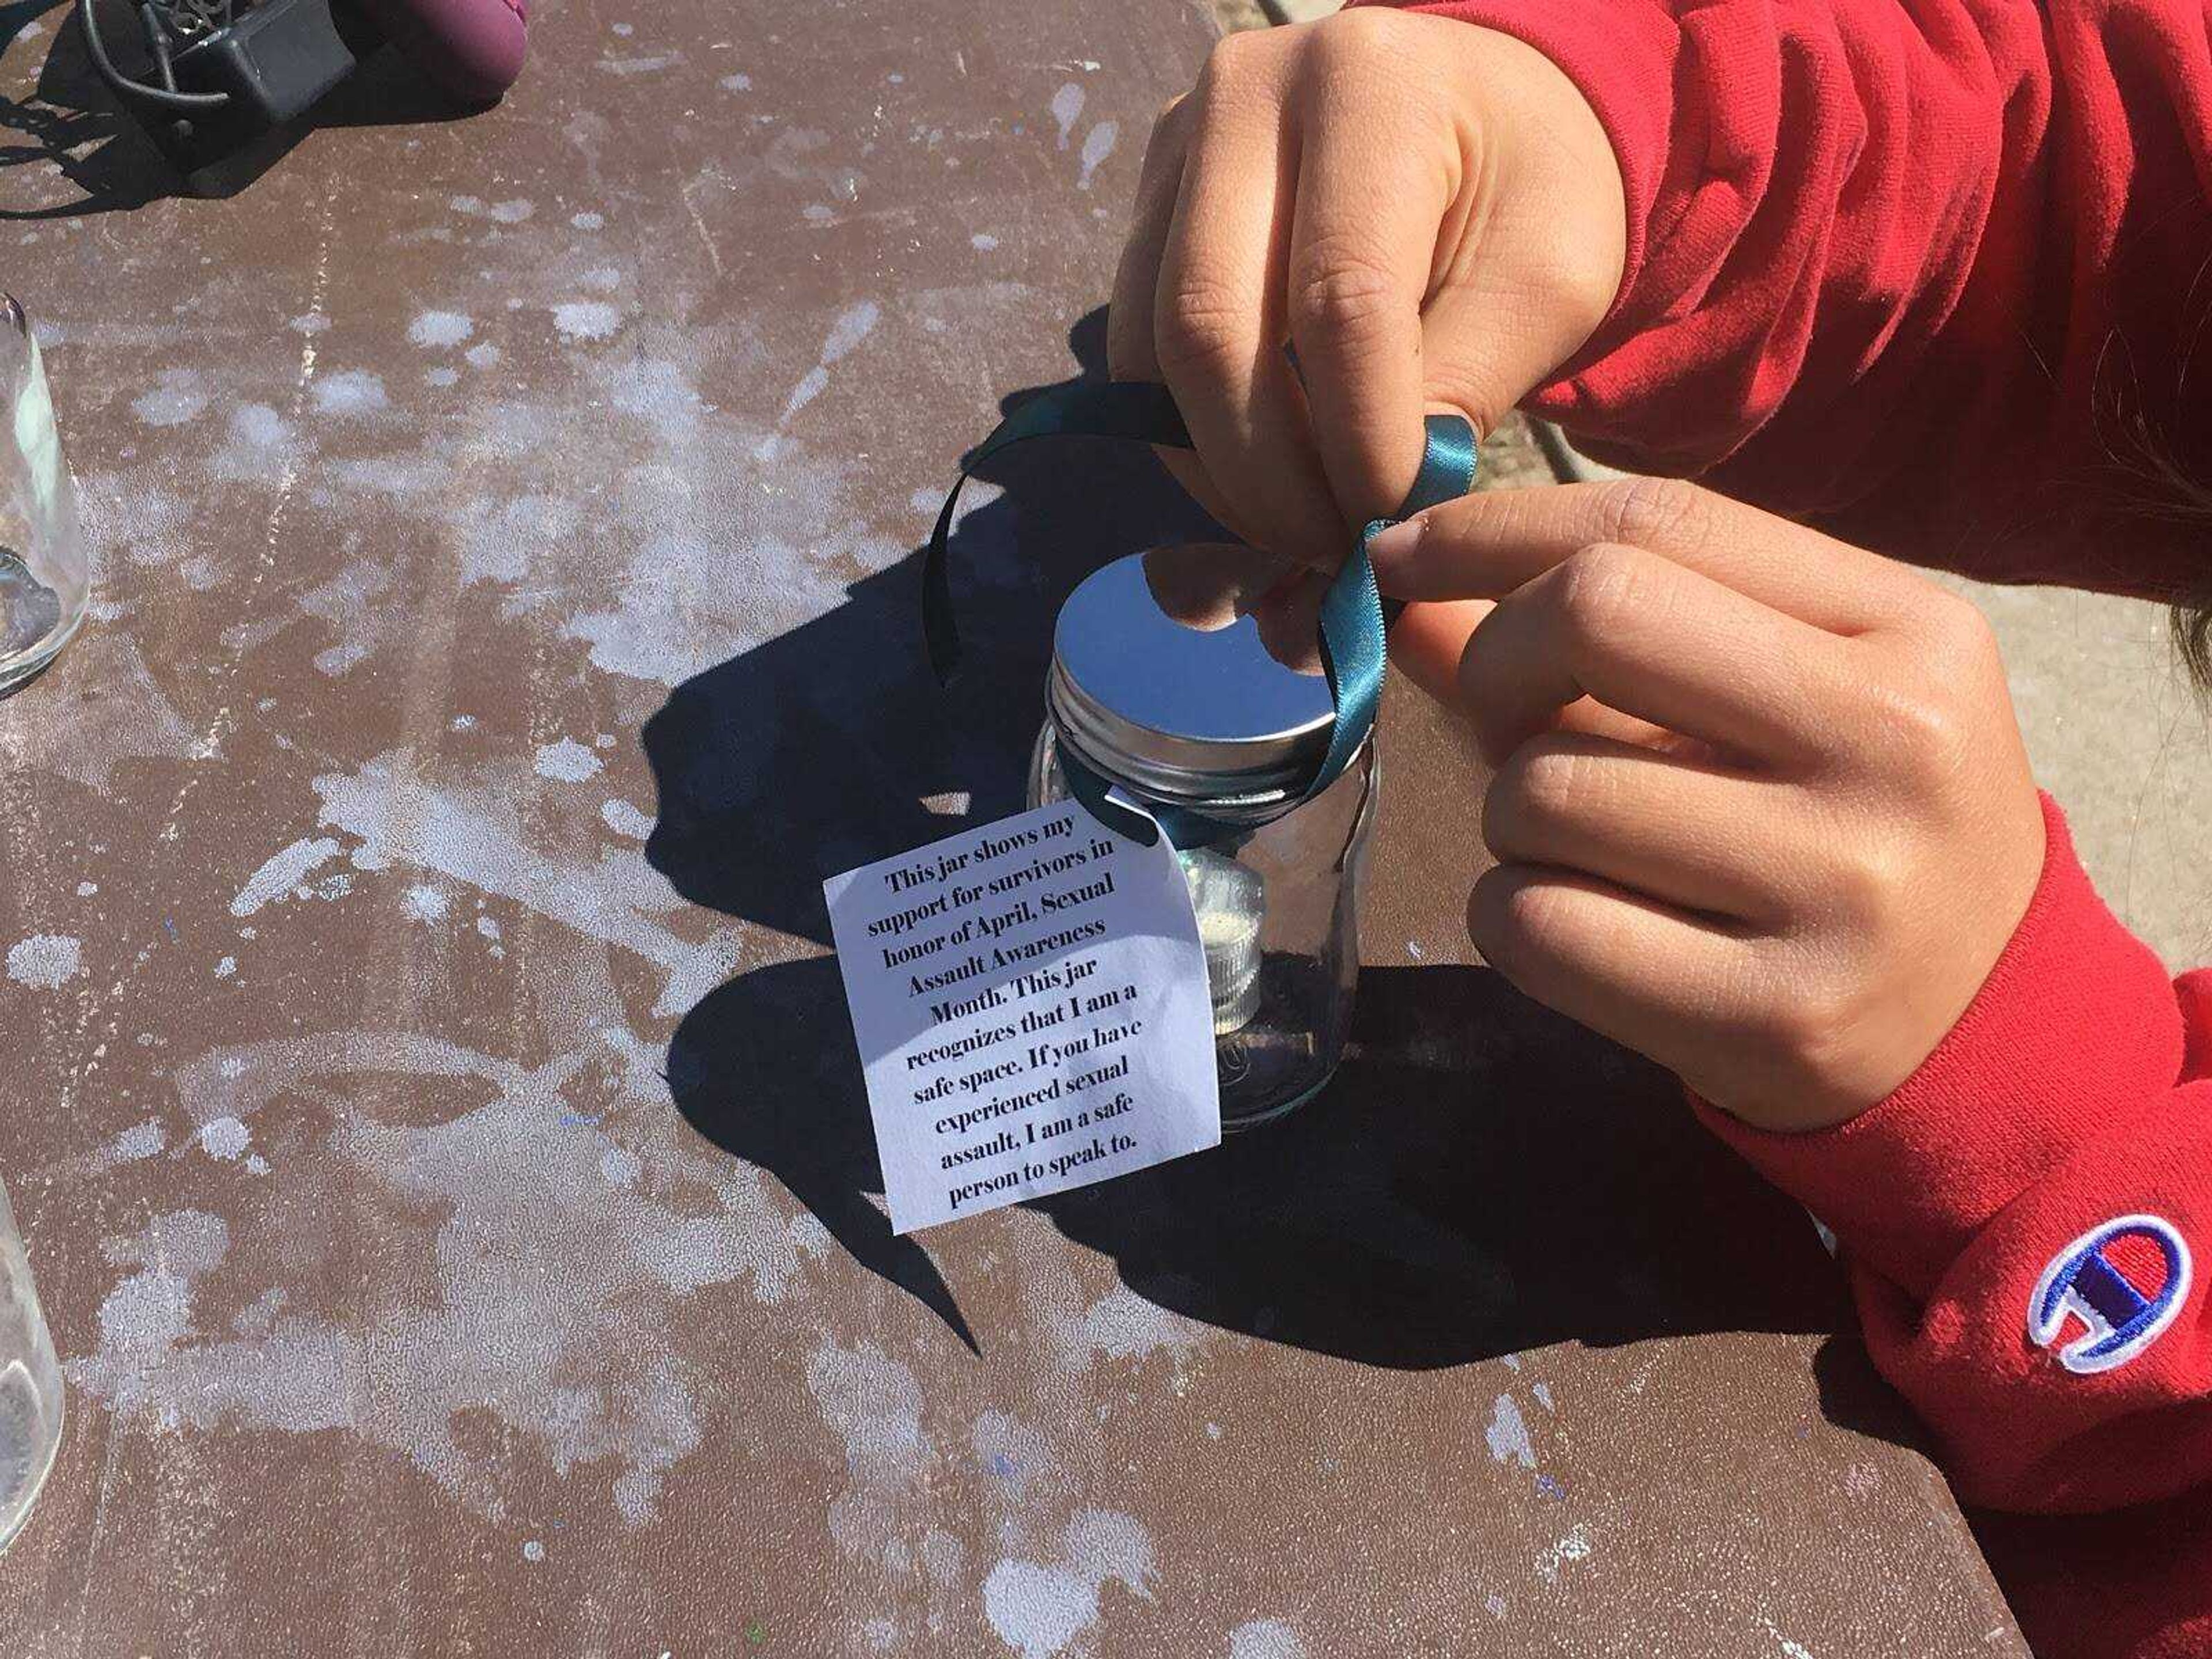 A Southeast student makes a safety jar at the booth for Sexual Assault Awareness Month. Similar to the lid, nearby trees were wrapped with teal ribbons.